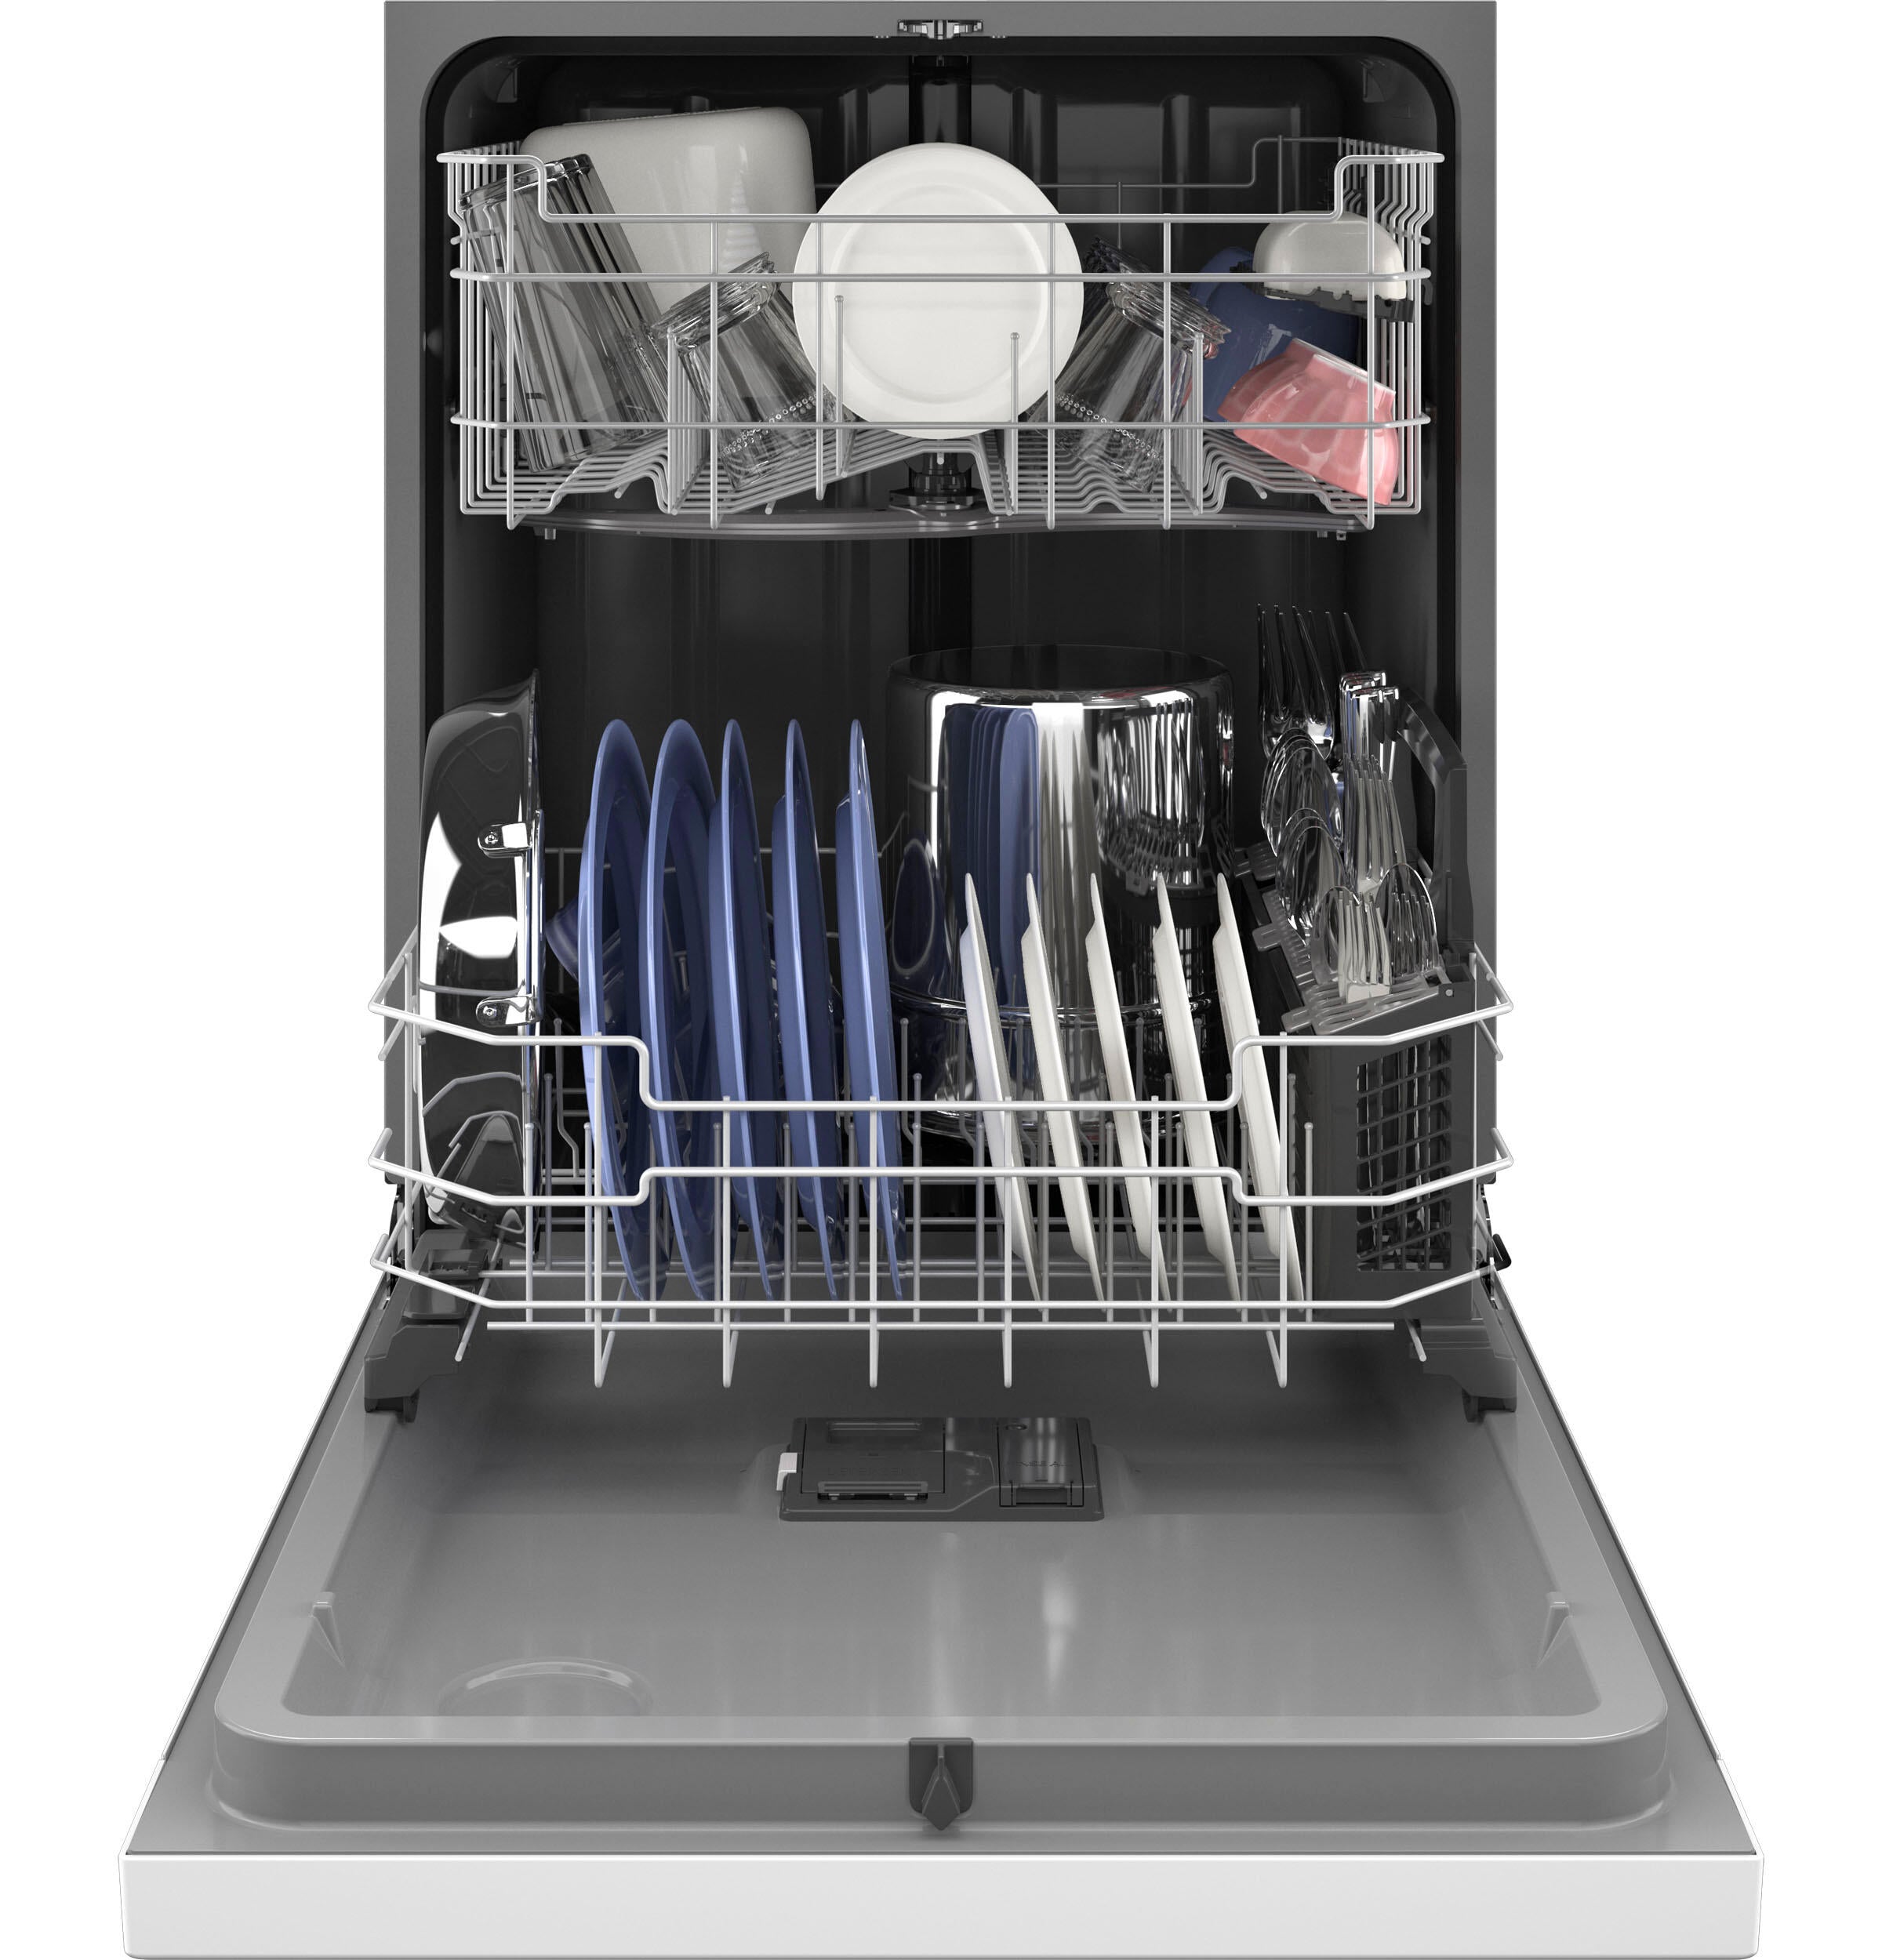 Ge Appliances GDF550PGRWW Ge® Front Control With Plastic Interior Dishwasher With Sanitize Cycle & Dry Boost